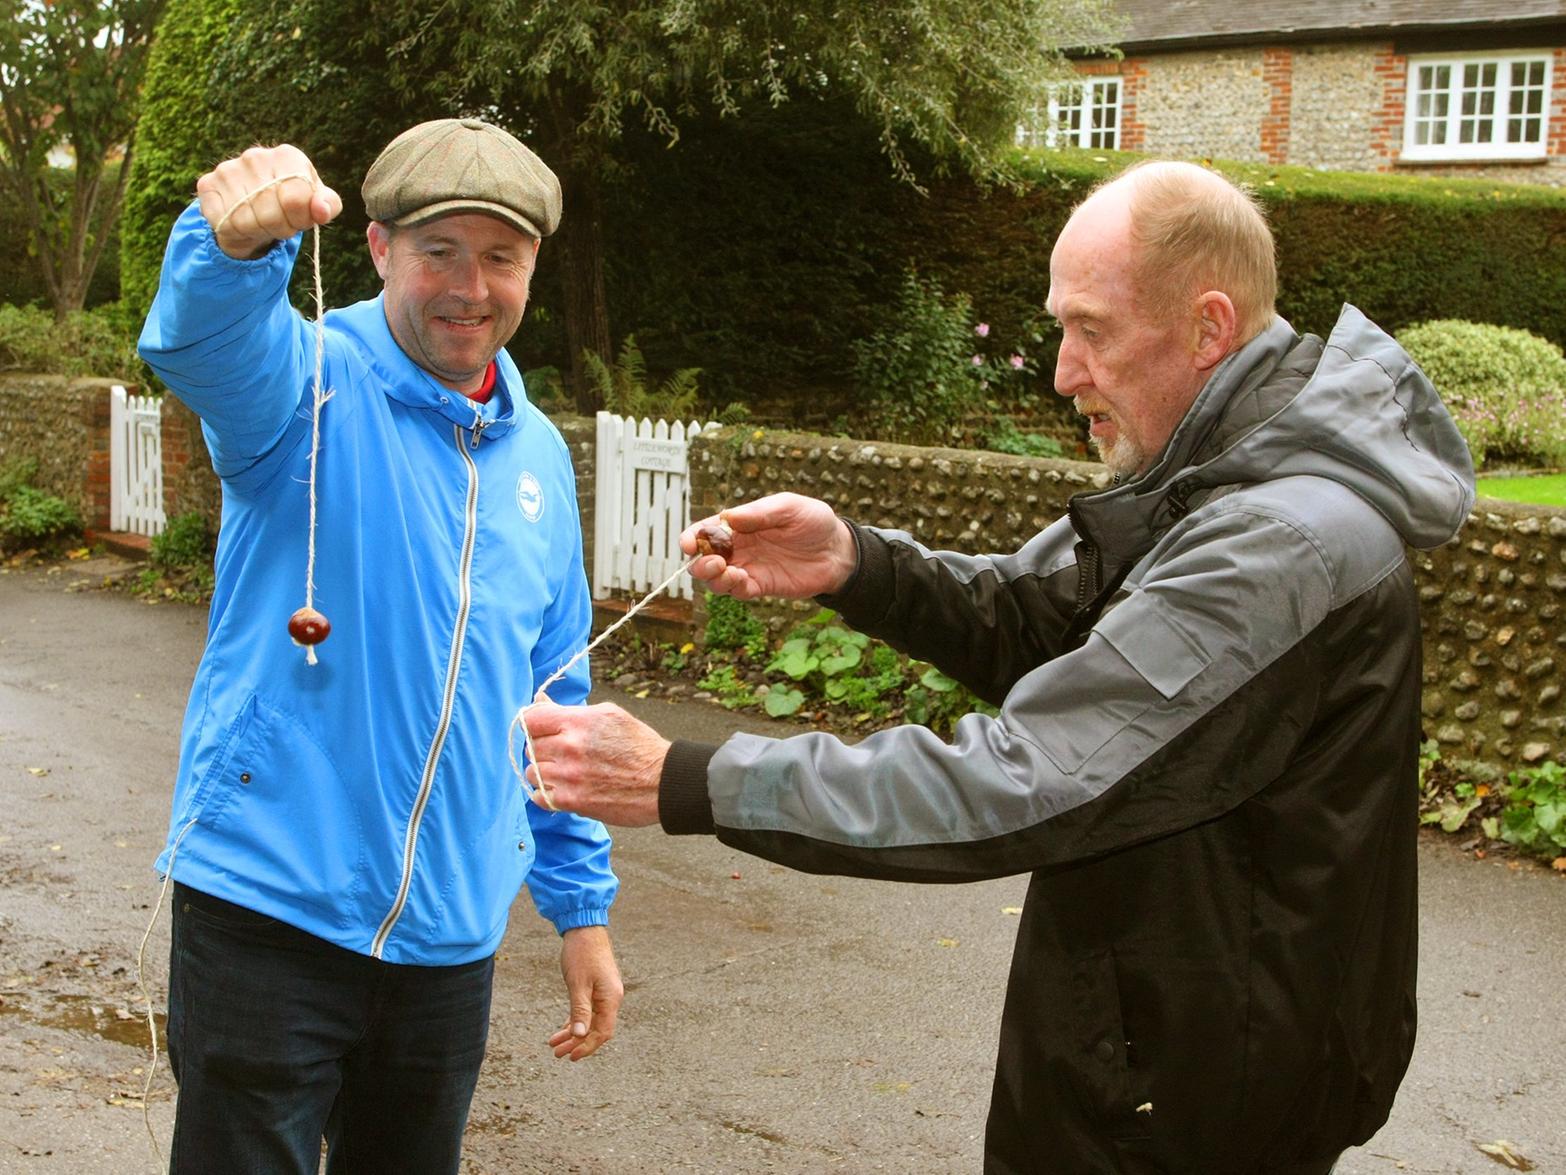 The annual conker competition was held at The Spotted Cow pub in Angmering.